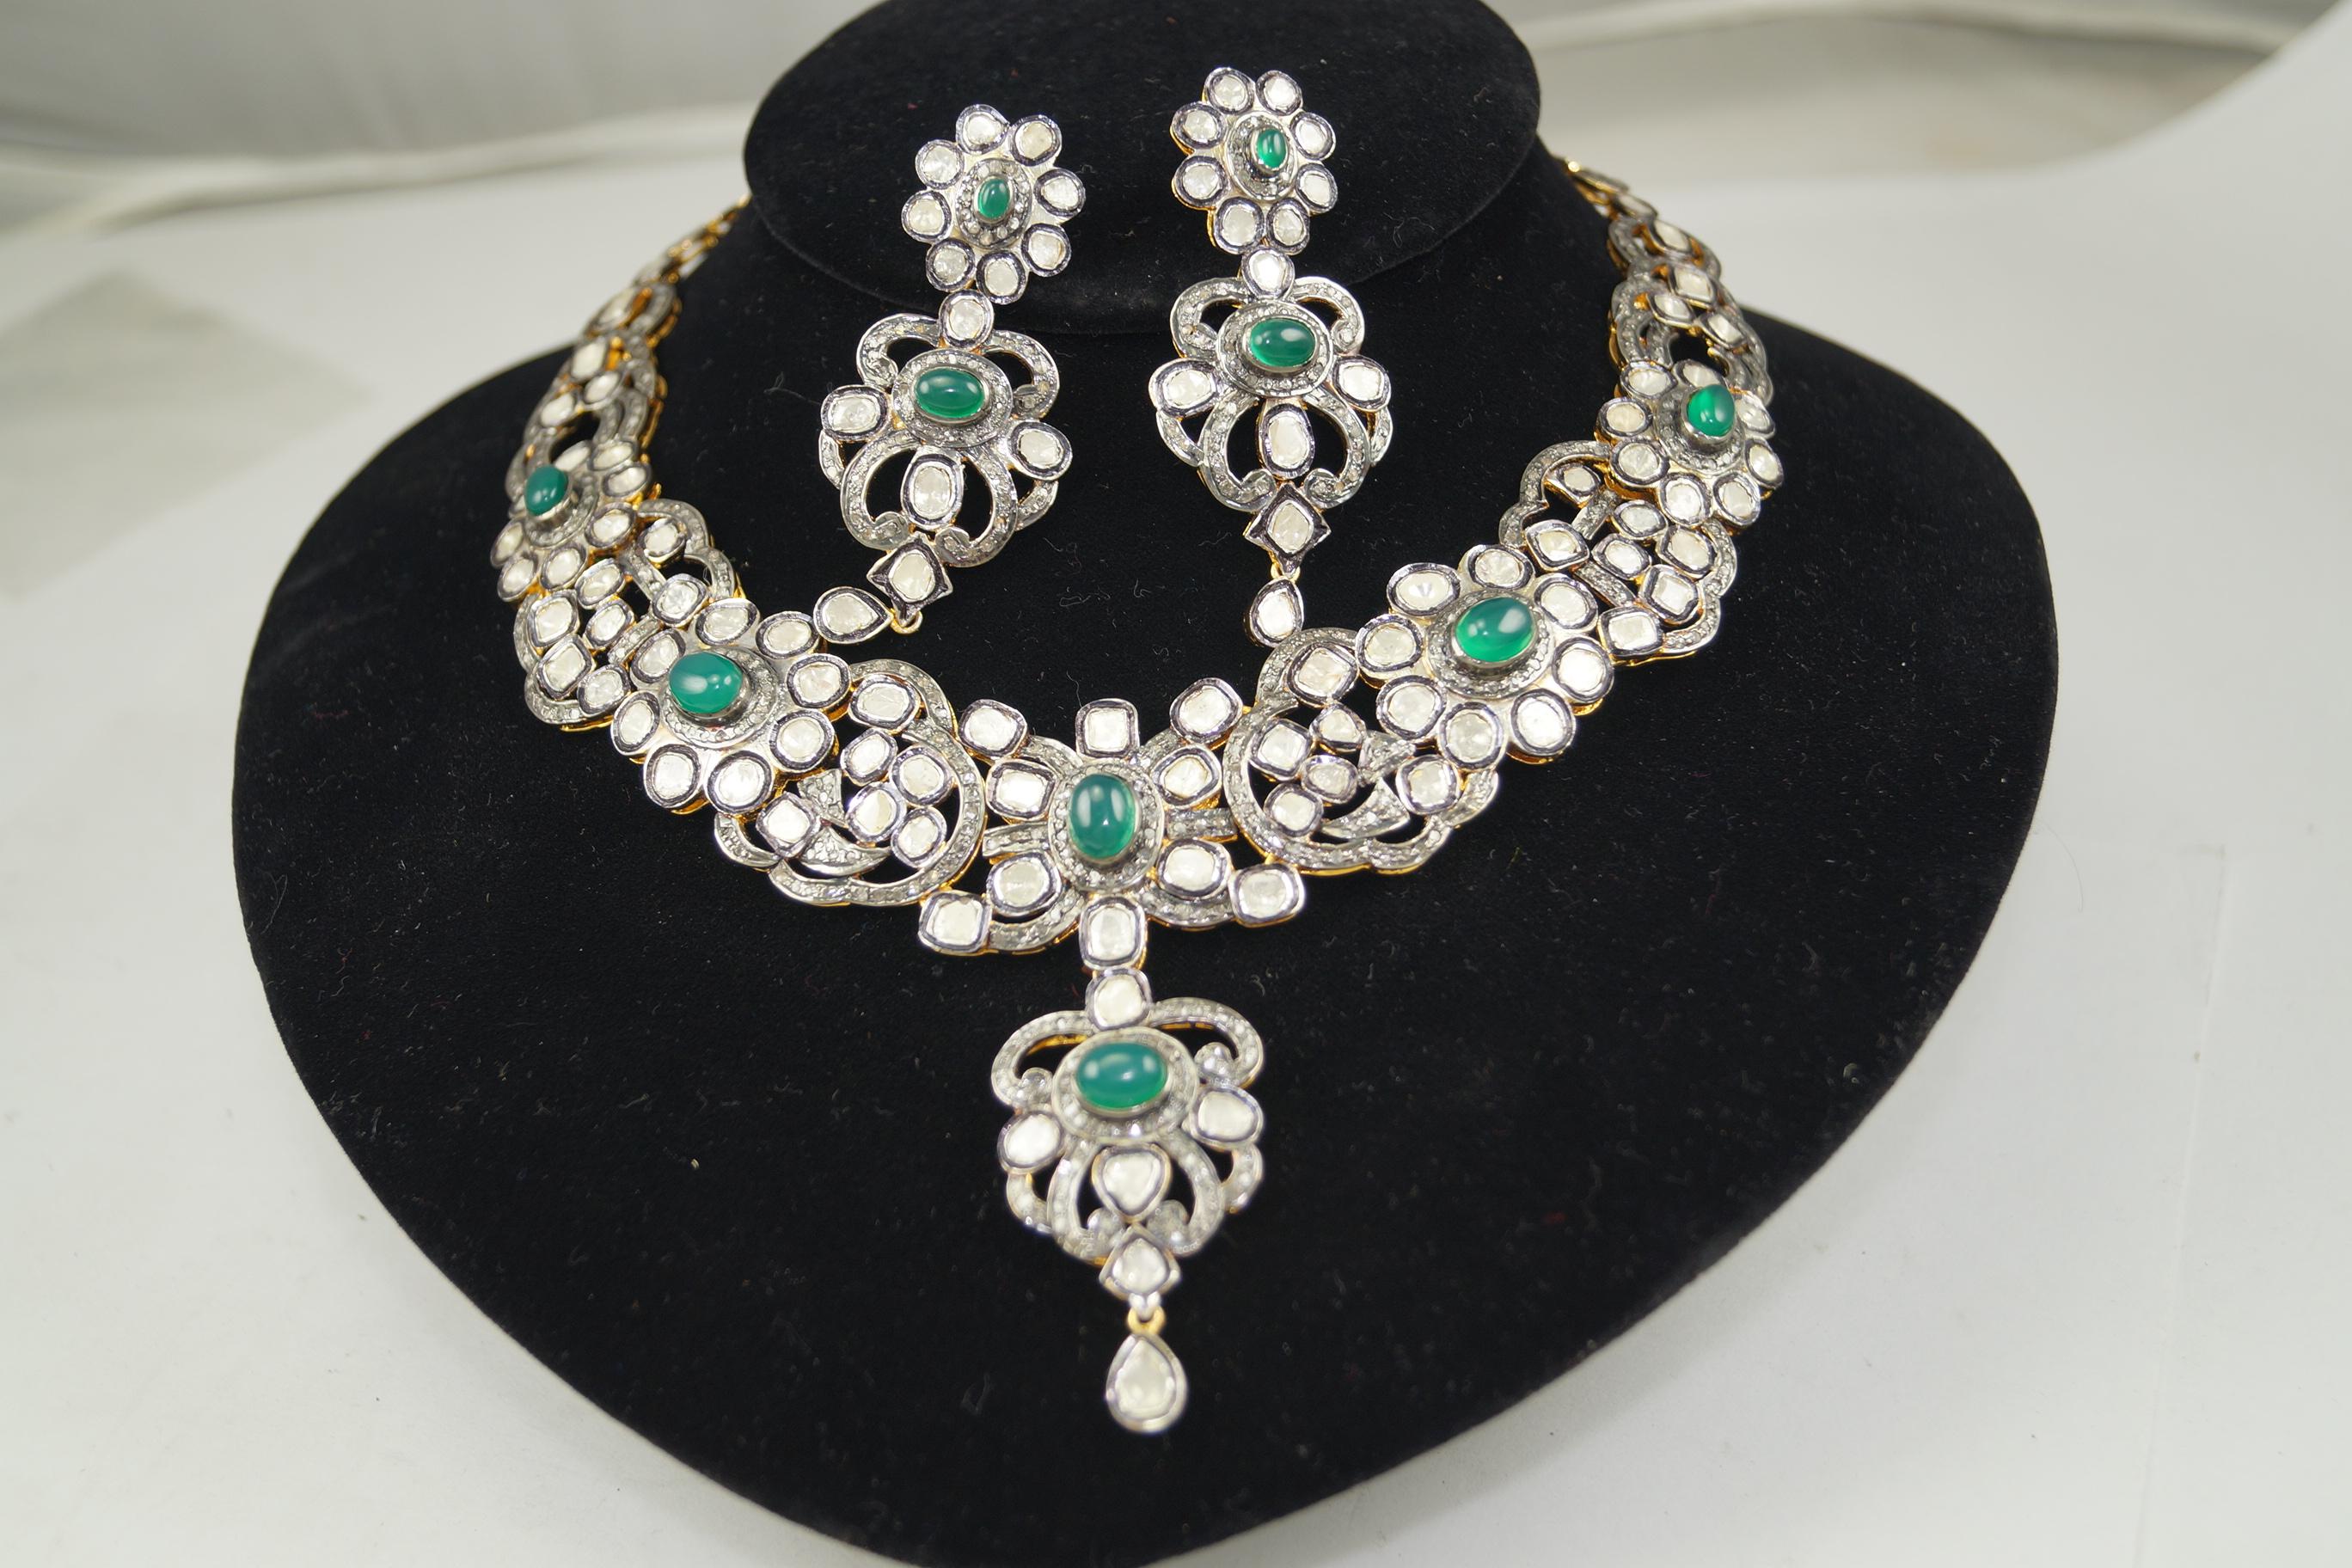 Natural Uncut Diamonds green onyx Sterling silver necklace with earrings For Sale